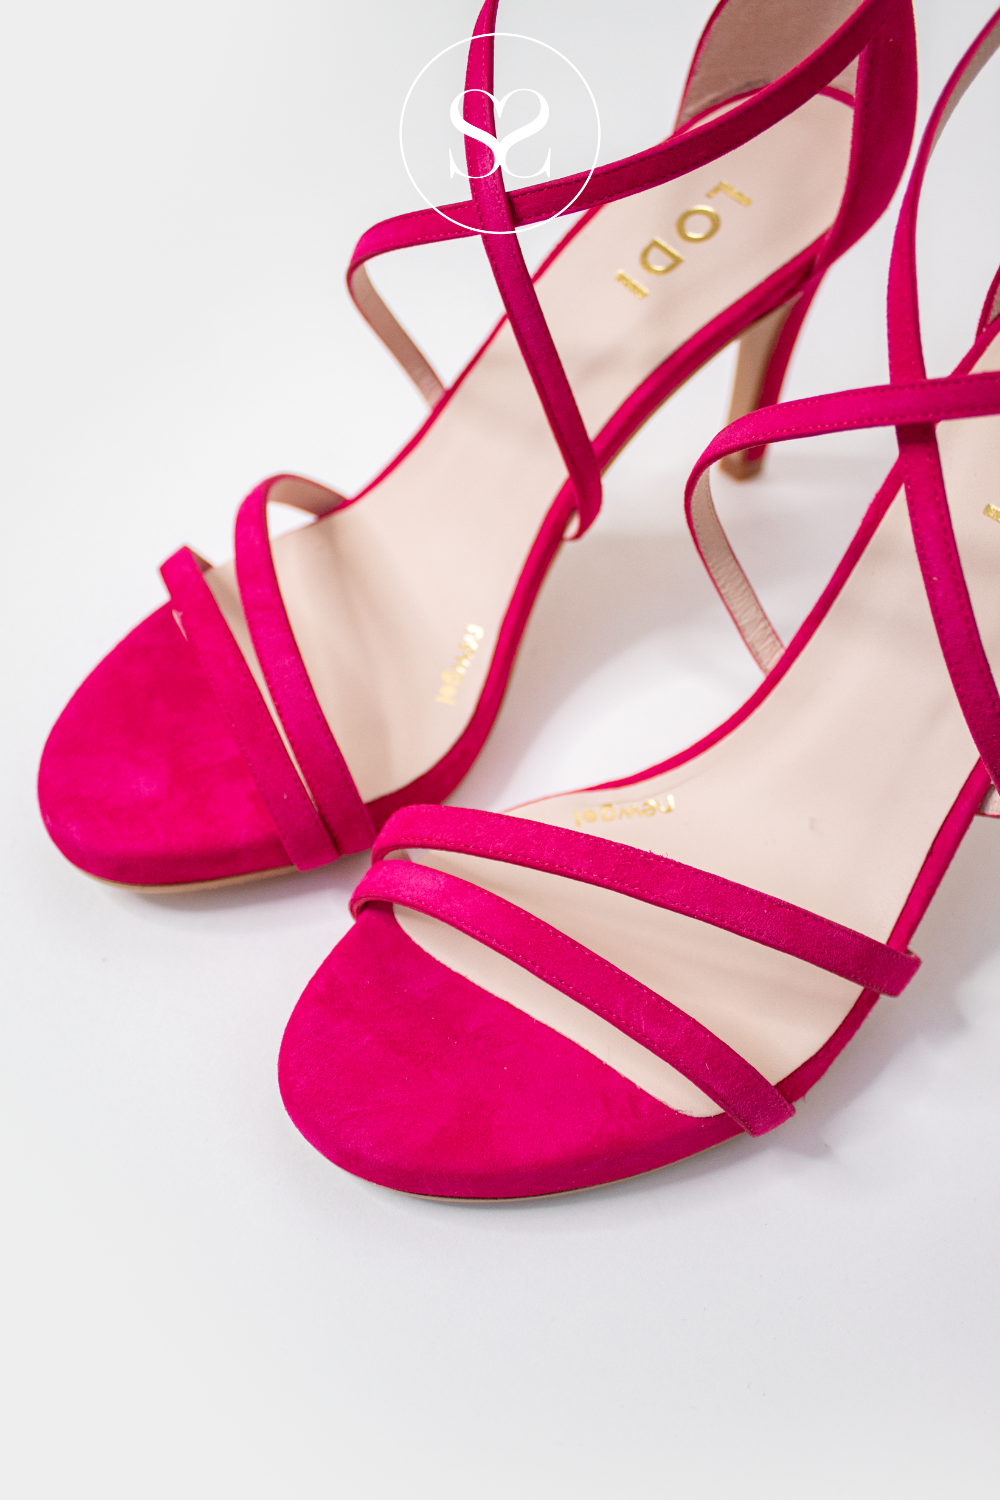 LODI INRIKO PINK SUEDE STRAPPY HIGH HEEL SANDAL WITH CRISS CROSS STRAPS AND ADJUSTABLE BUCKLE